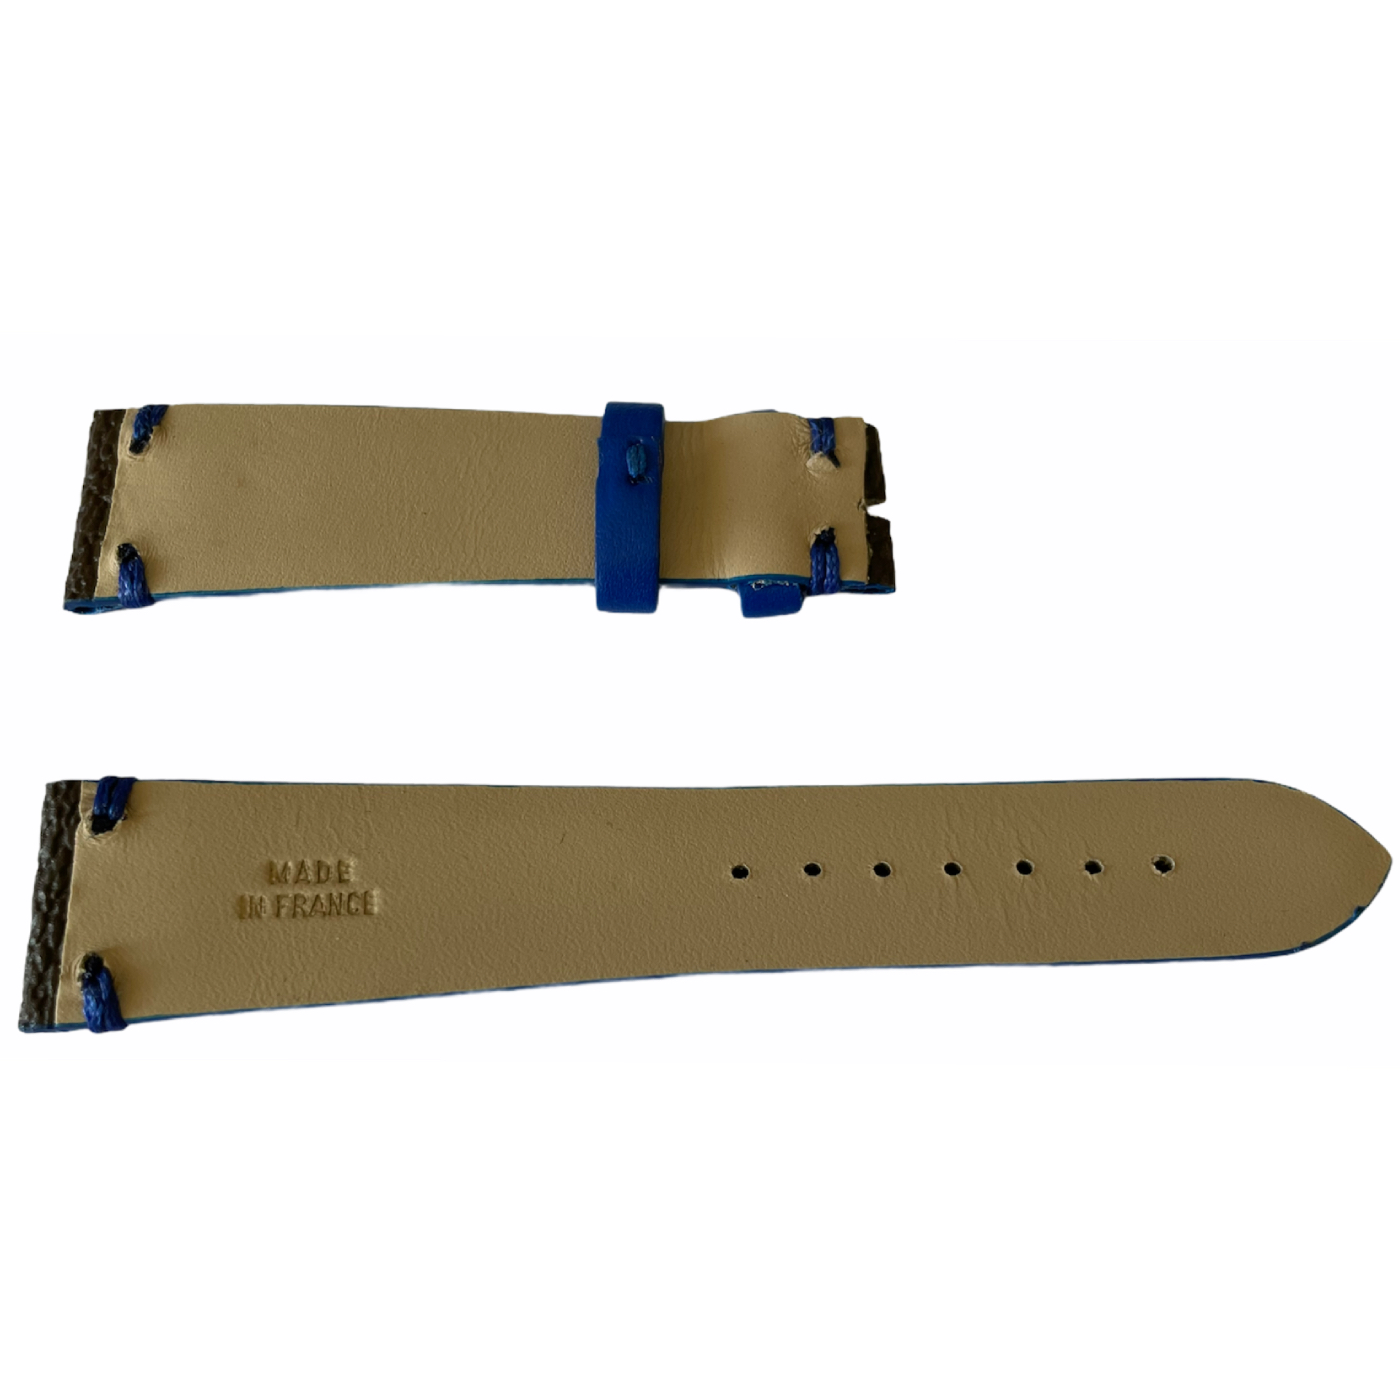 Louis Vuitton Monogram Leather Strap for Watches